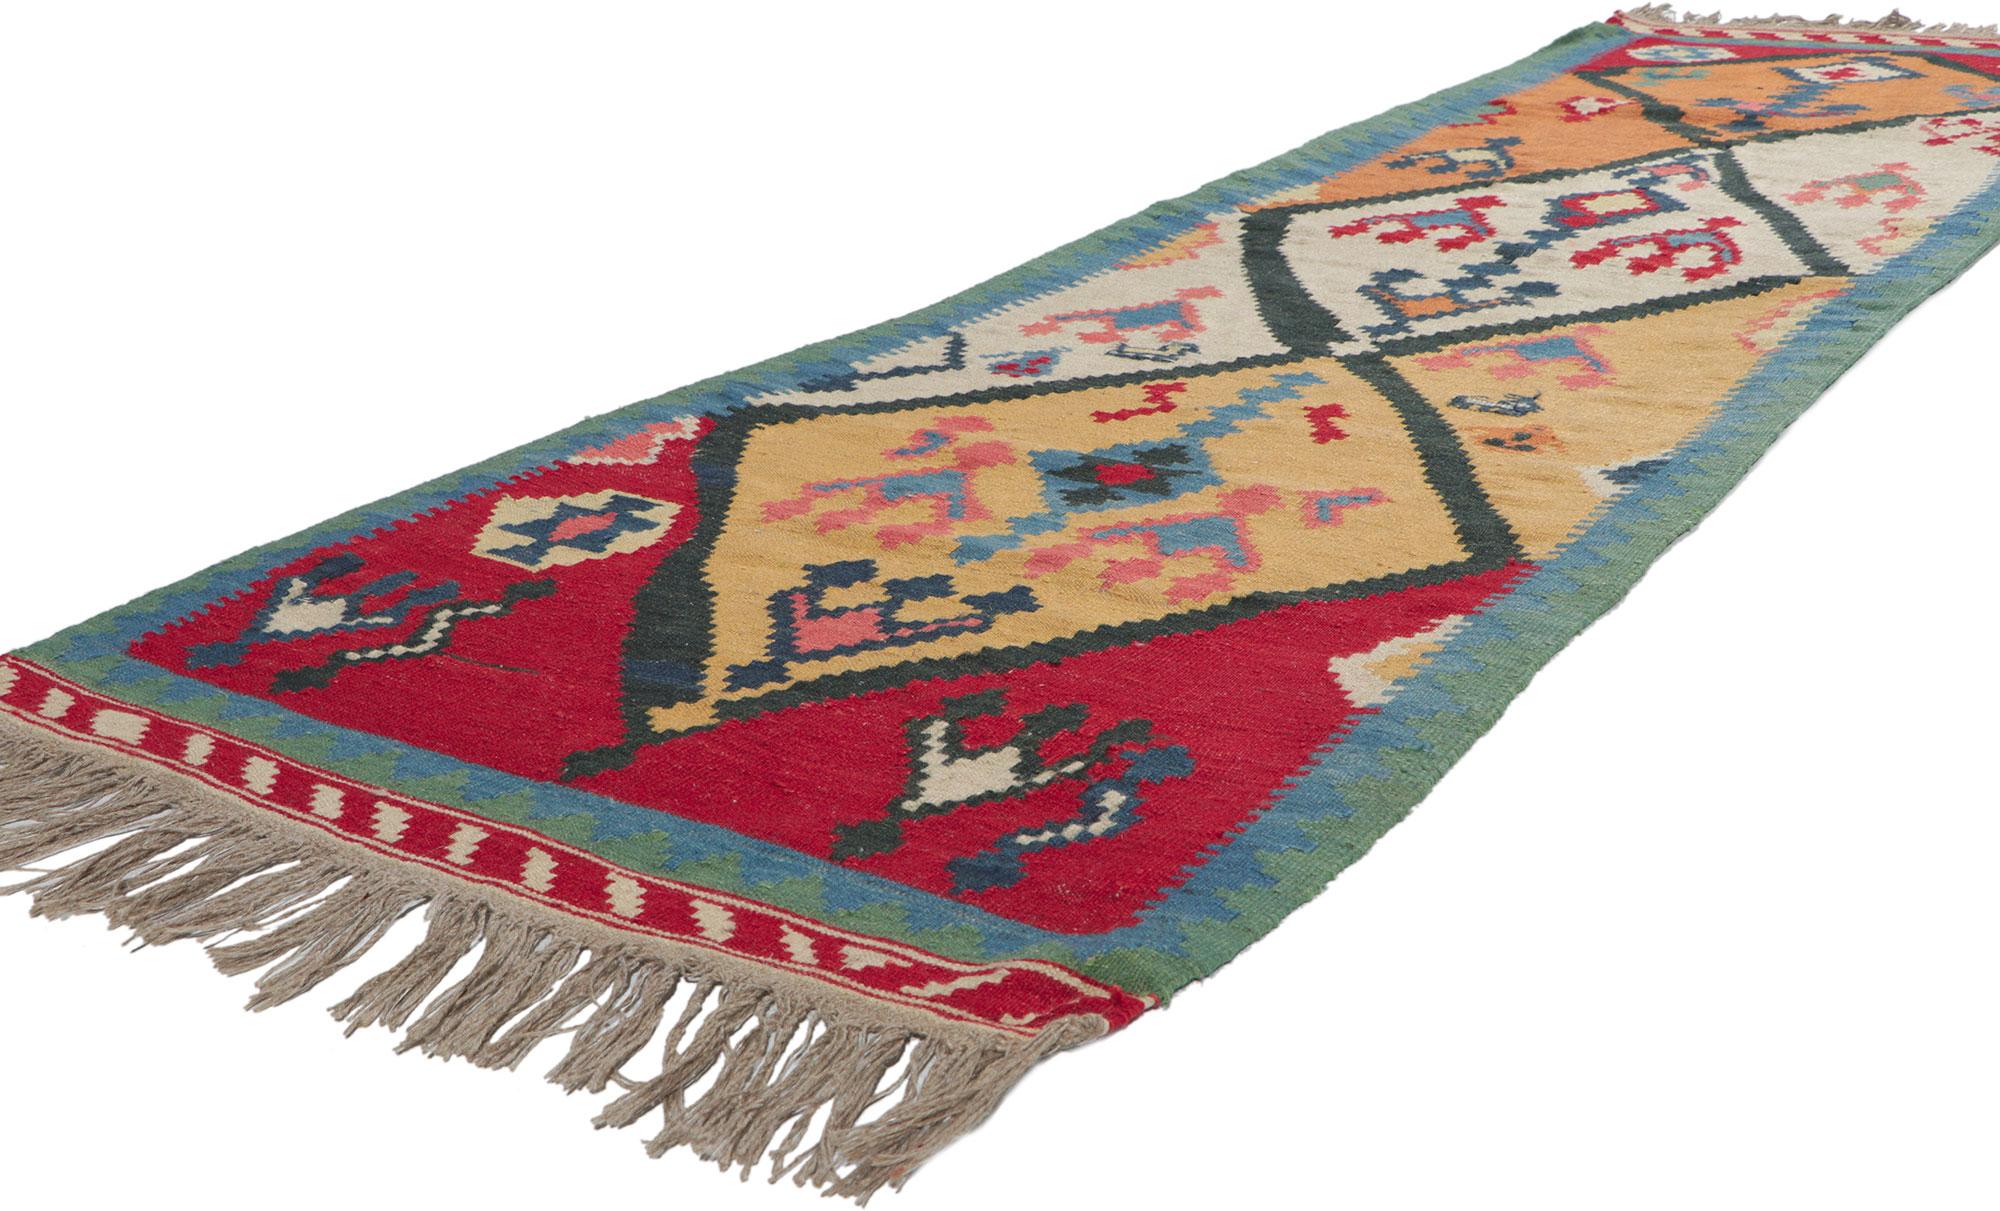 61059 vintage Persian Shiraz Kilim Runner with Tribal style, 02'08 x 10'01. Full of tiny details and a bold expressive design, this hand-woven wool vintage Persian Shiraz kilim runner is a captivating vision of woven beauty. The abrashed field